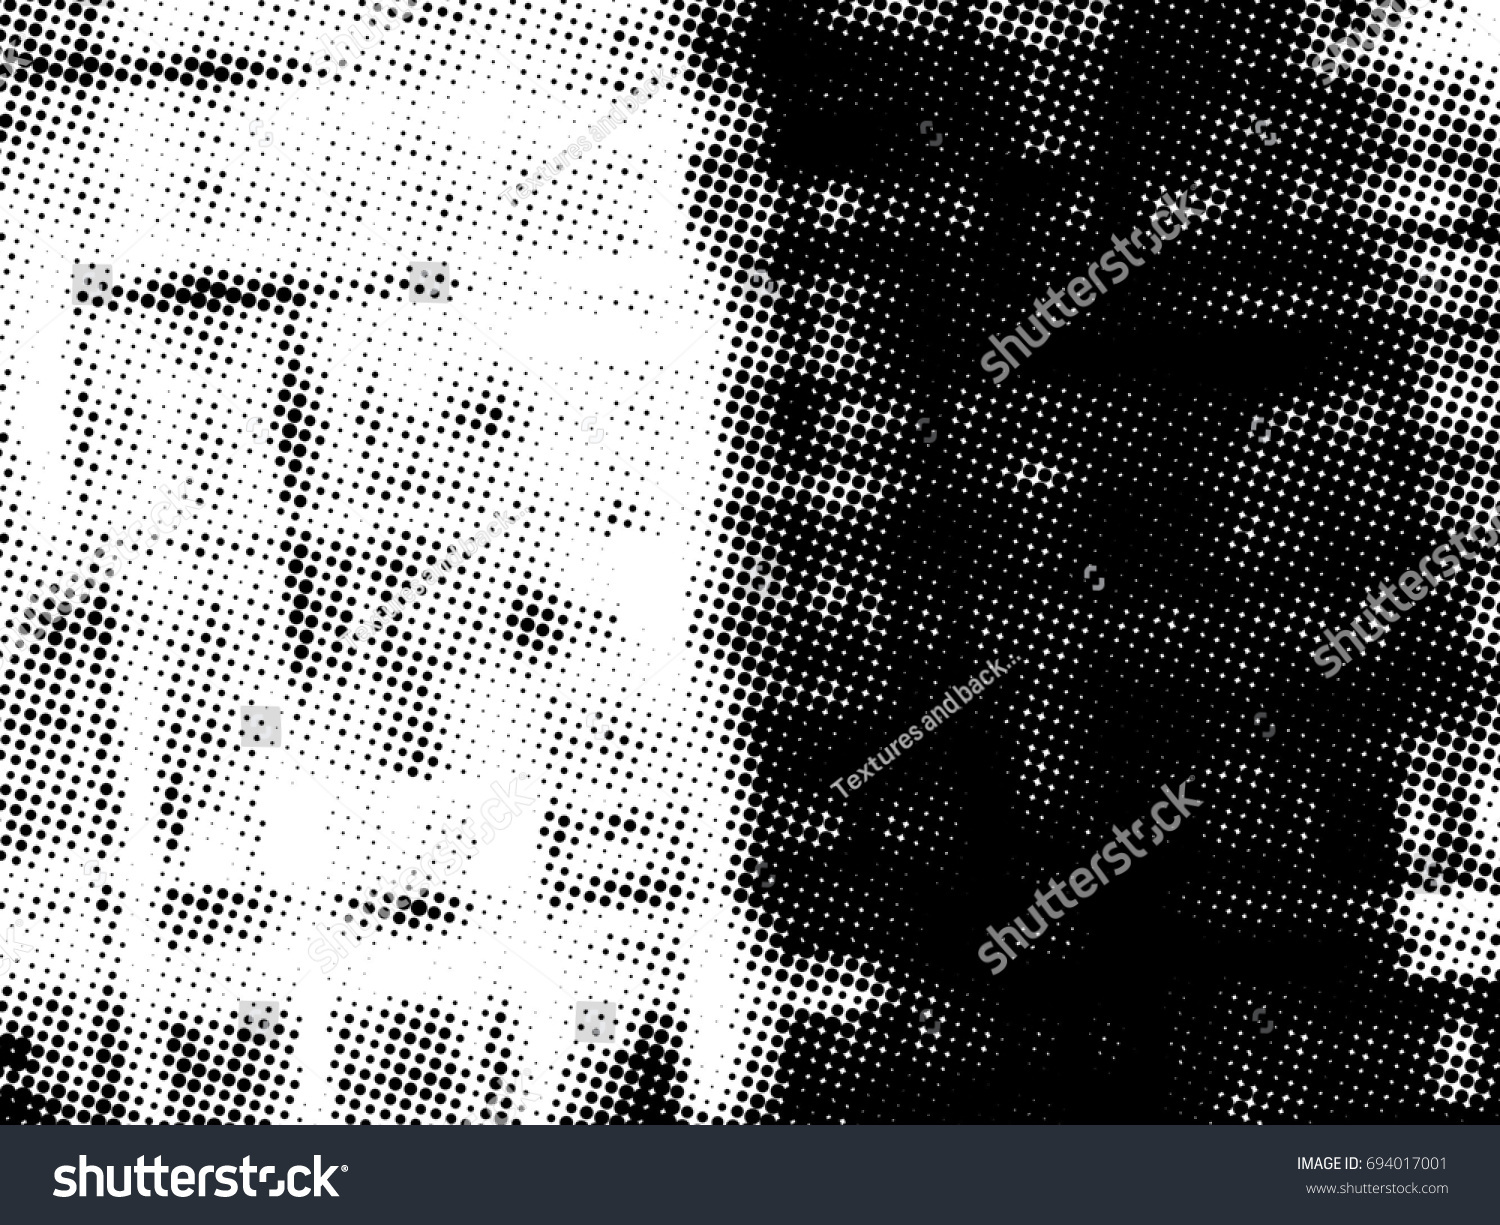 Grunge halftone black and white. Abstract black and white texture. Vintage grayscale monochrome #694017001